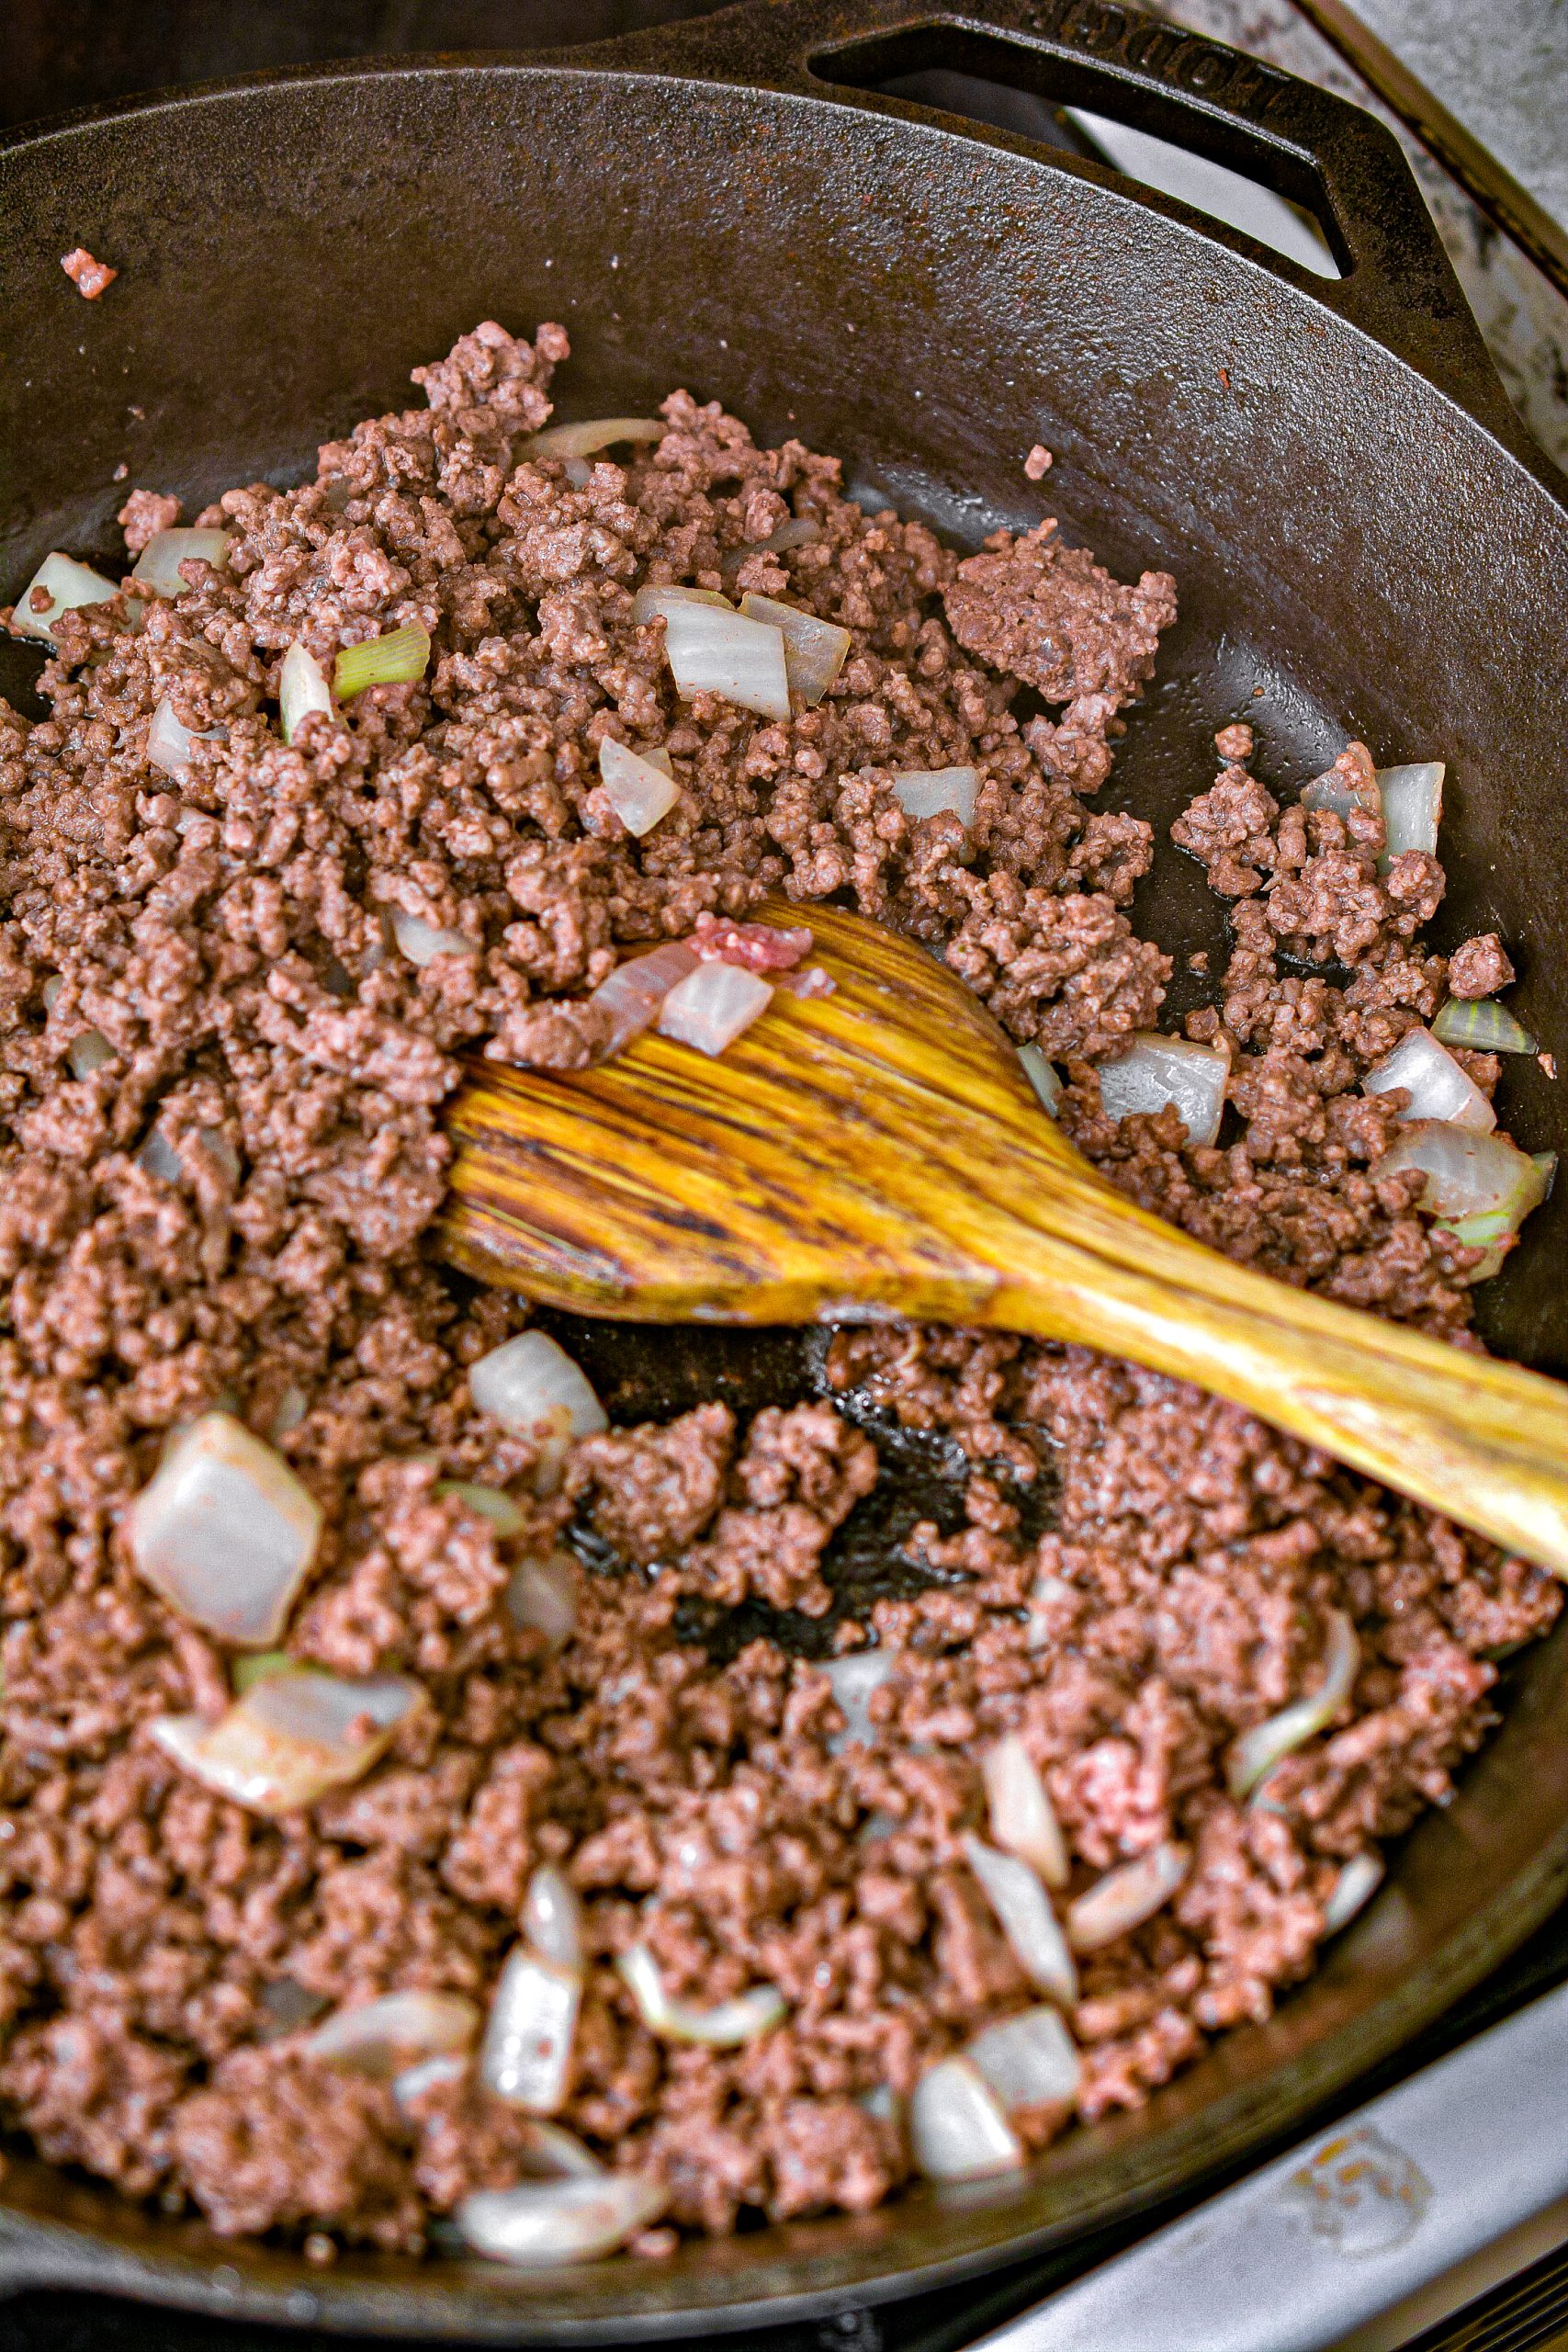 Cook the ground beef and onions in a skillet over medium-high heat on the stove until the meat is completely browned and the onions are starting to become tender.